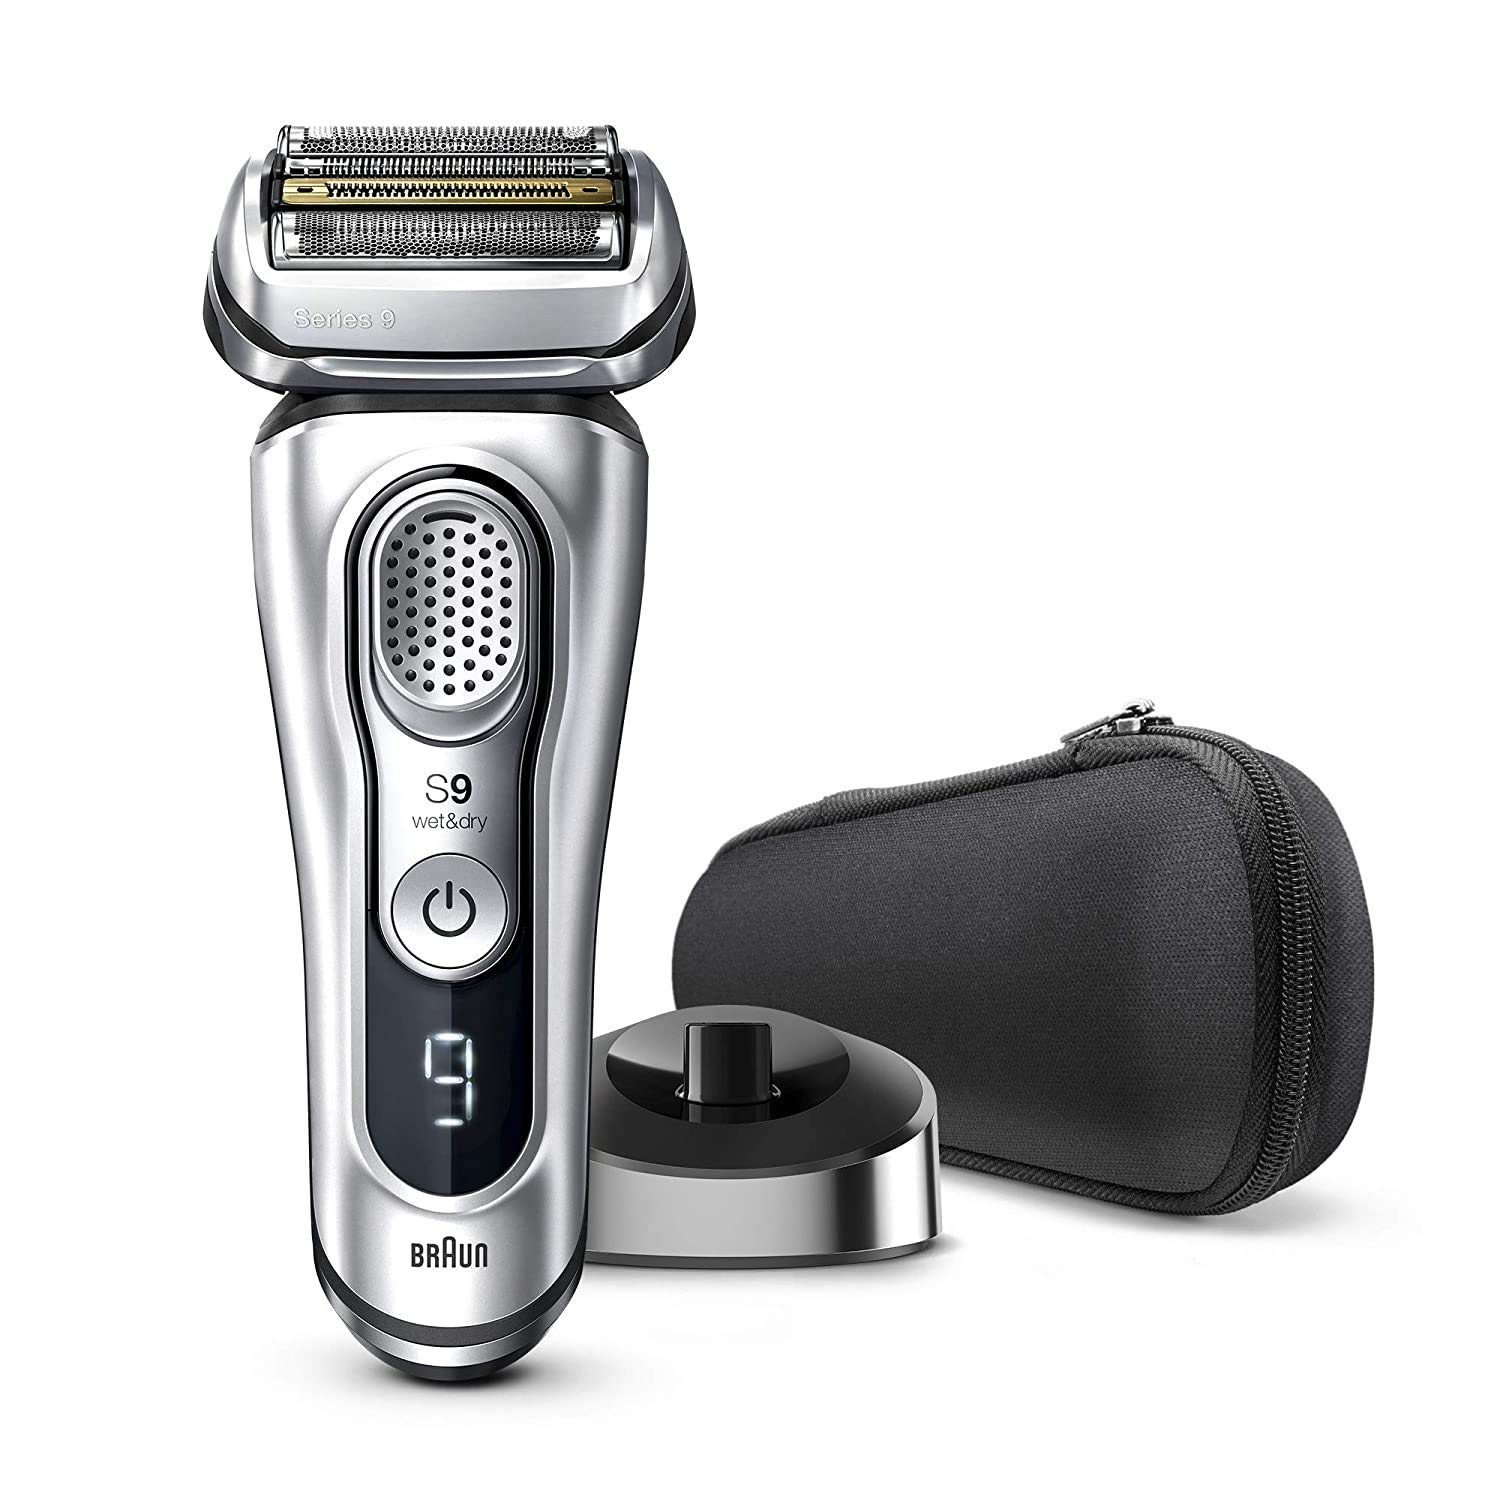 Amazon.com: Braun Electric Razor for Men, Series 9 9330s Electric Shaver, Pop-Up Precision Trimmer, Rechargeable, Wet &amp; Dry Foil Shaver with Travel Case: Beauty $179.94